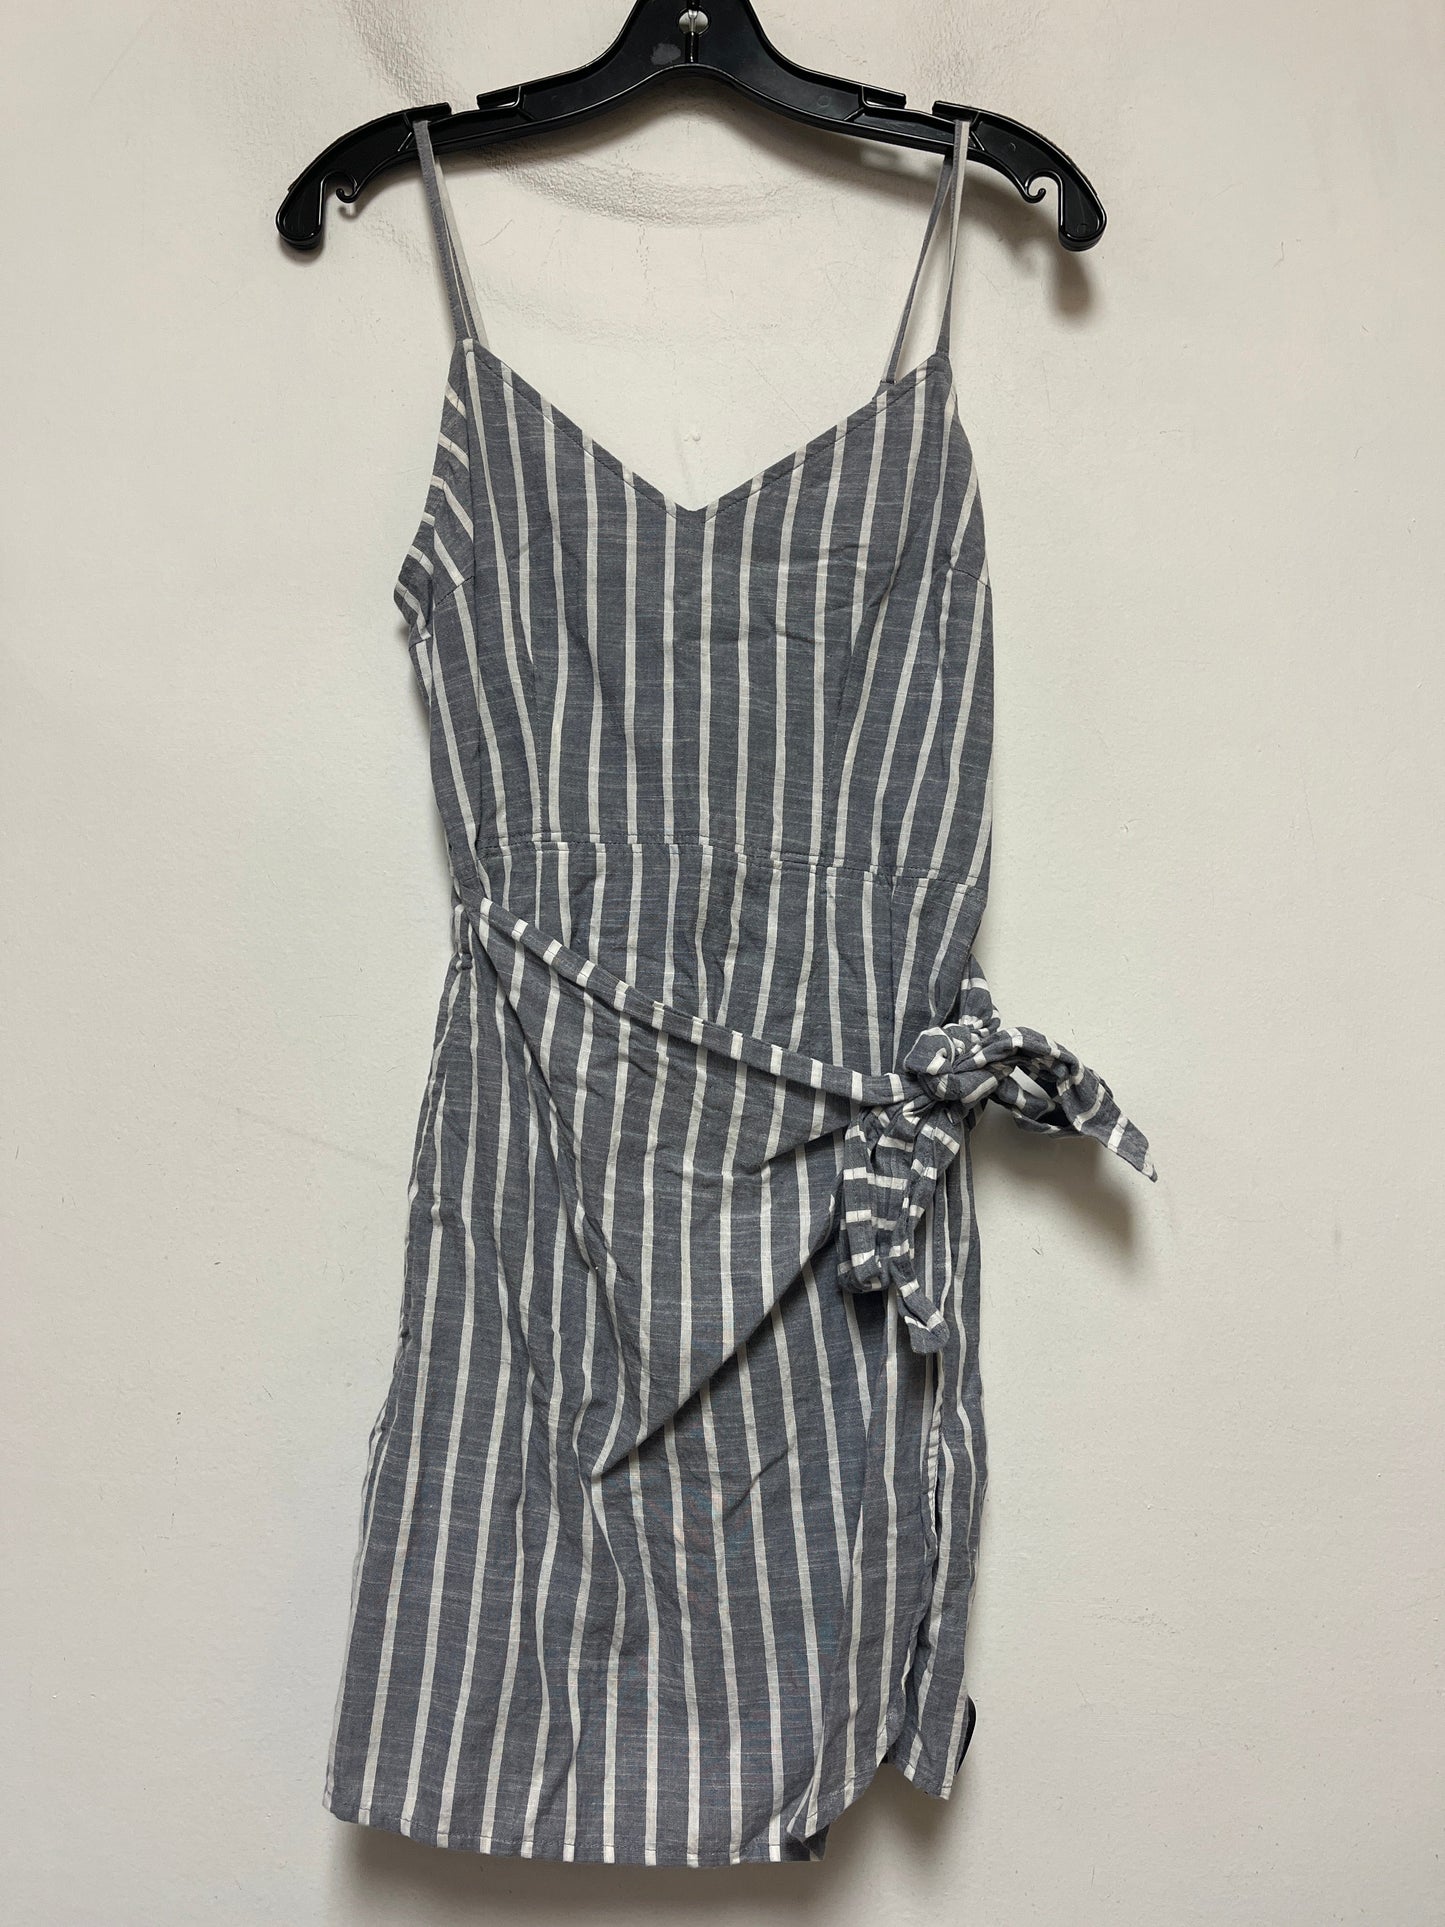 Striped Pattern Dress Casual Short Abercrombie And Fitch, Size S